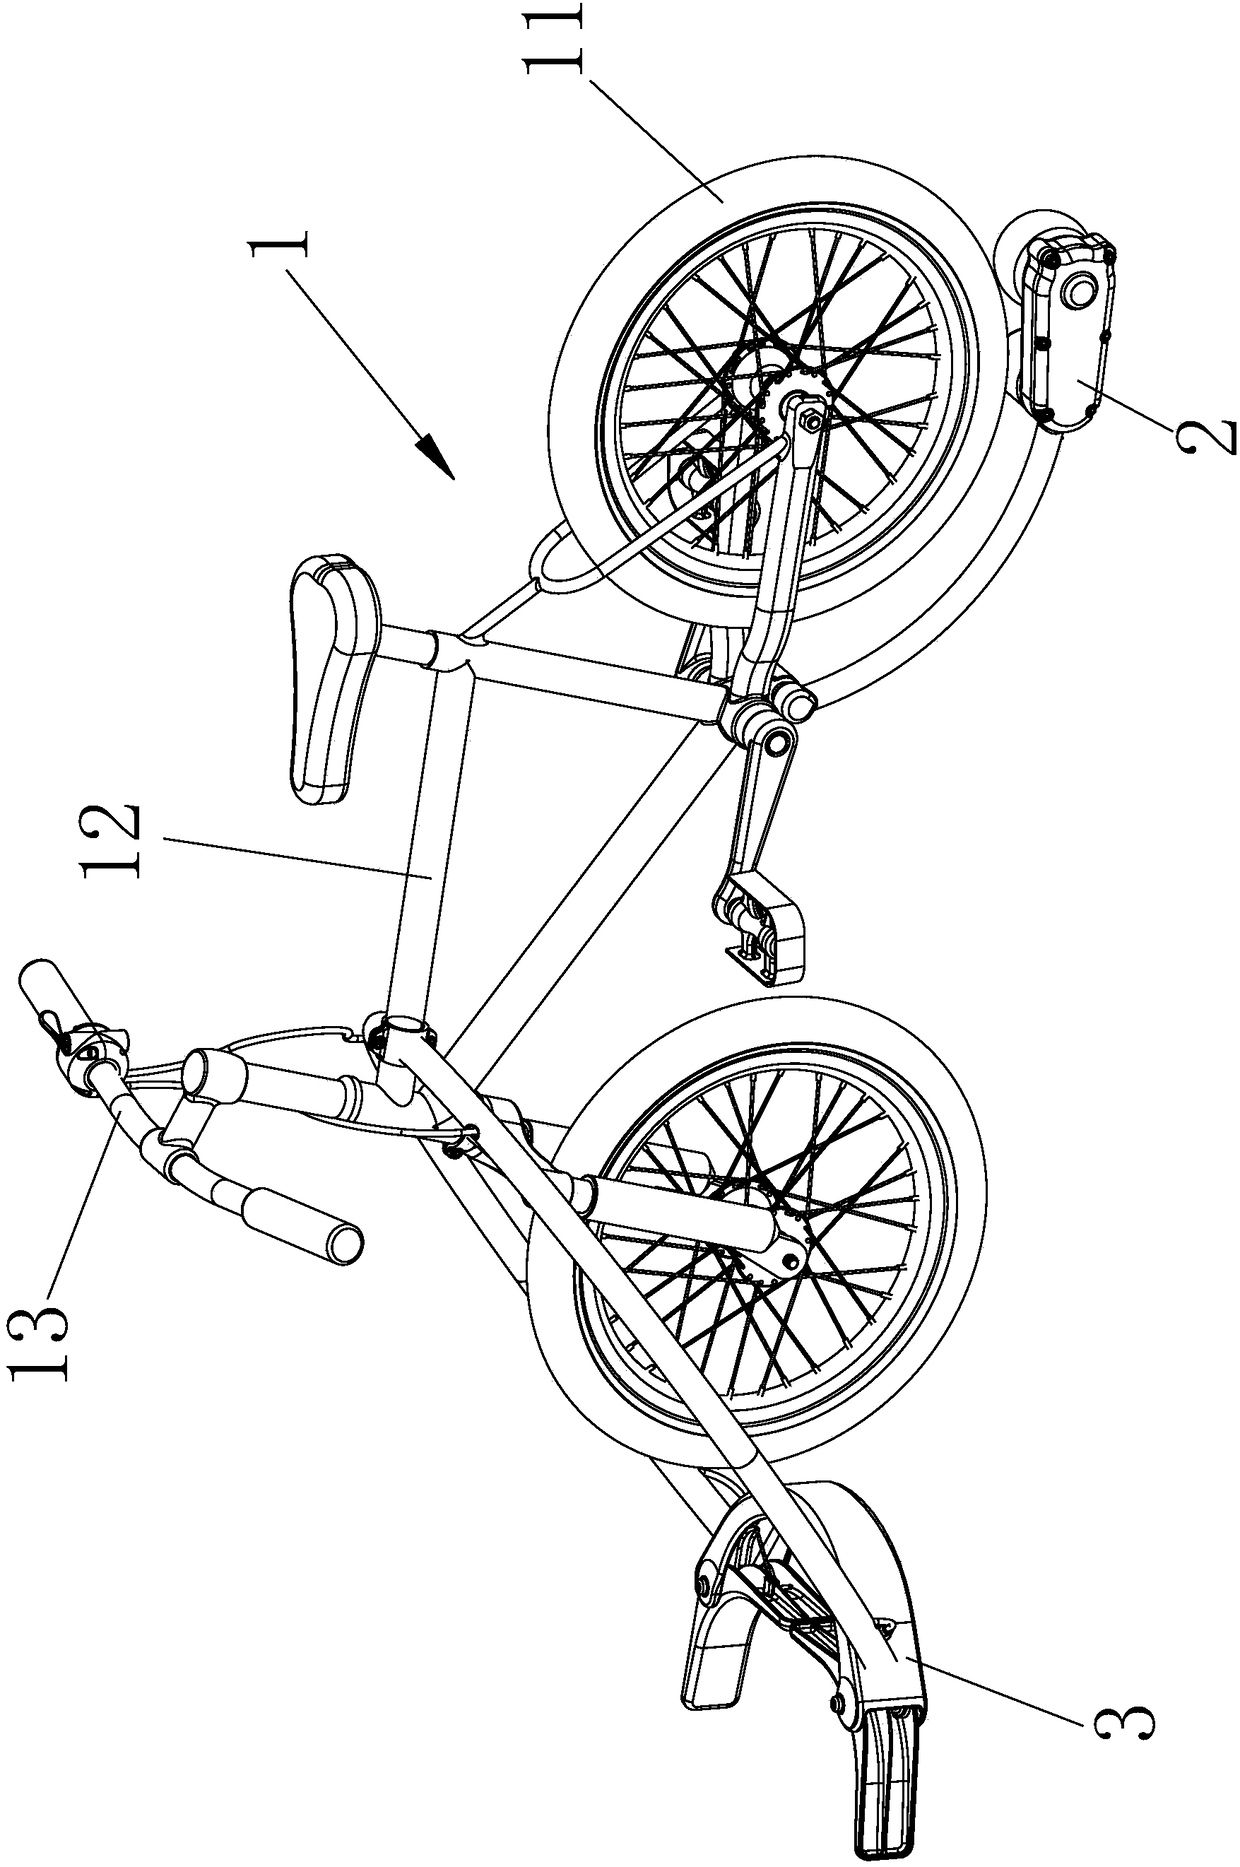 Single-wheel and single-roller bicycle game device